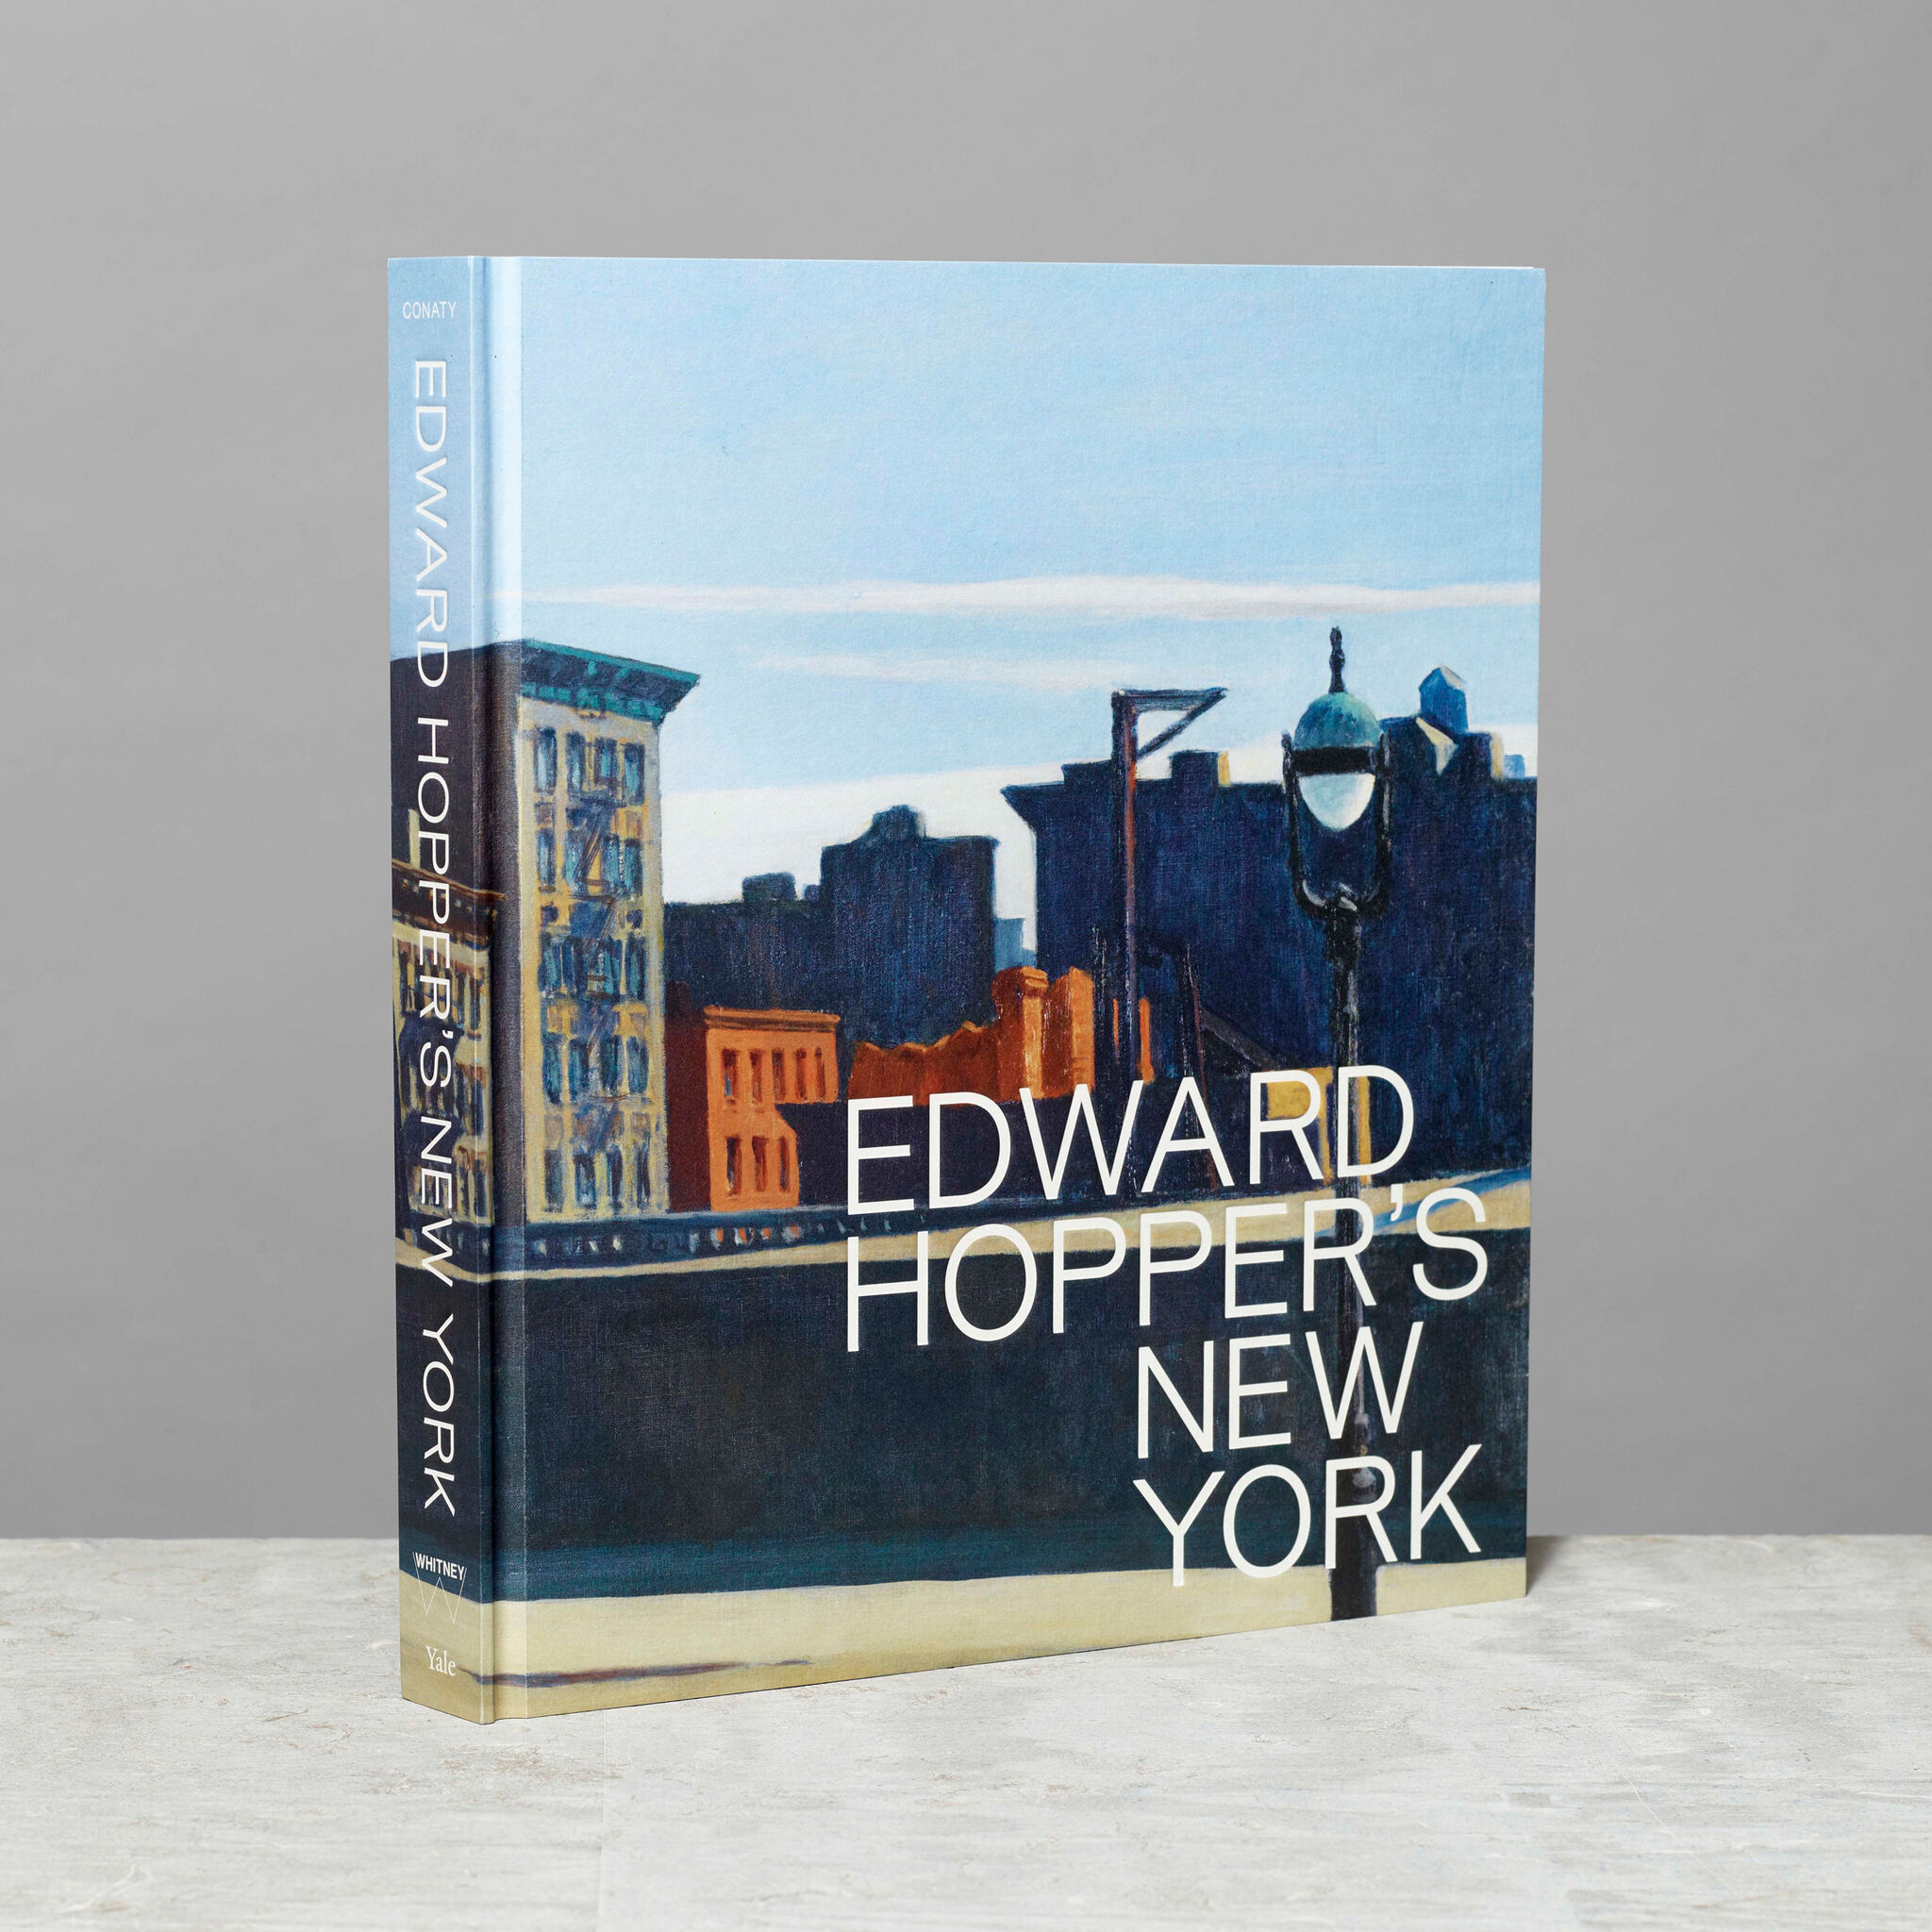 An image of a book with text on the cover reading "Edward Hopper's New York"